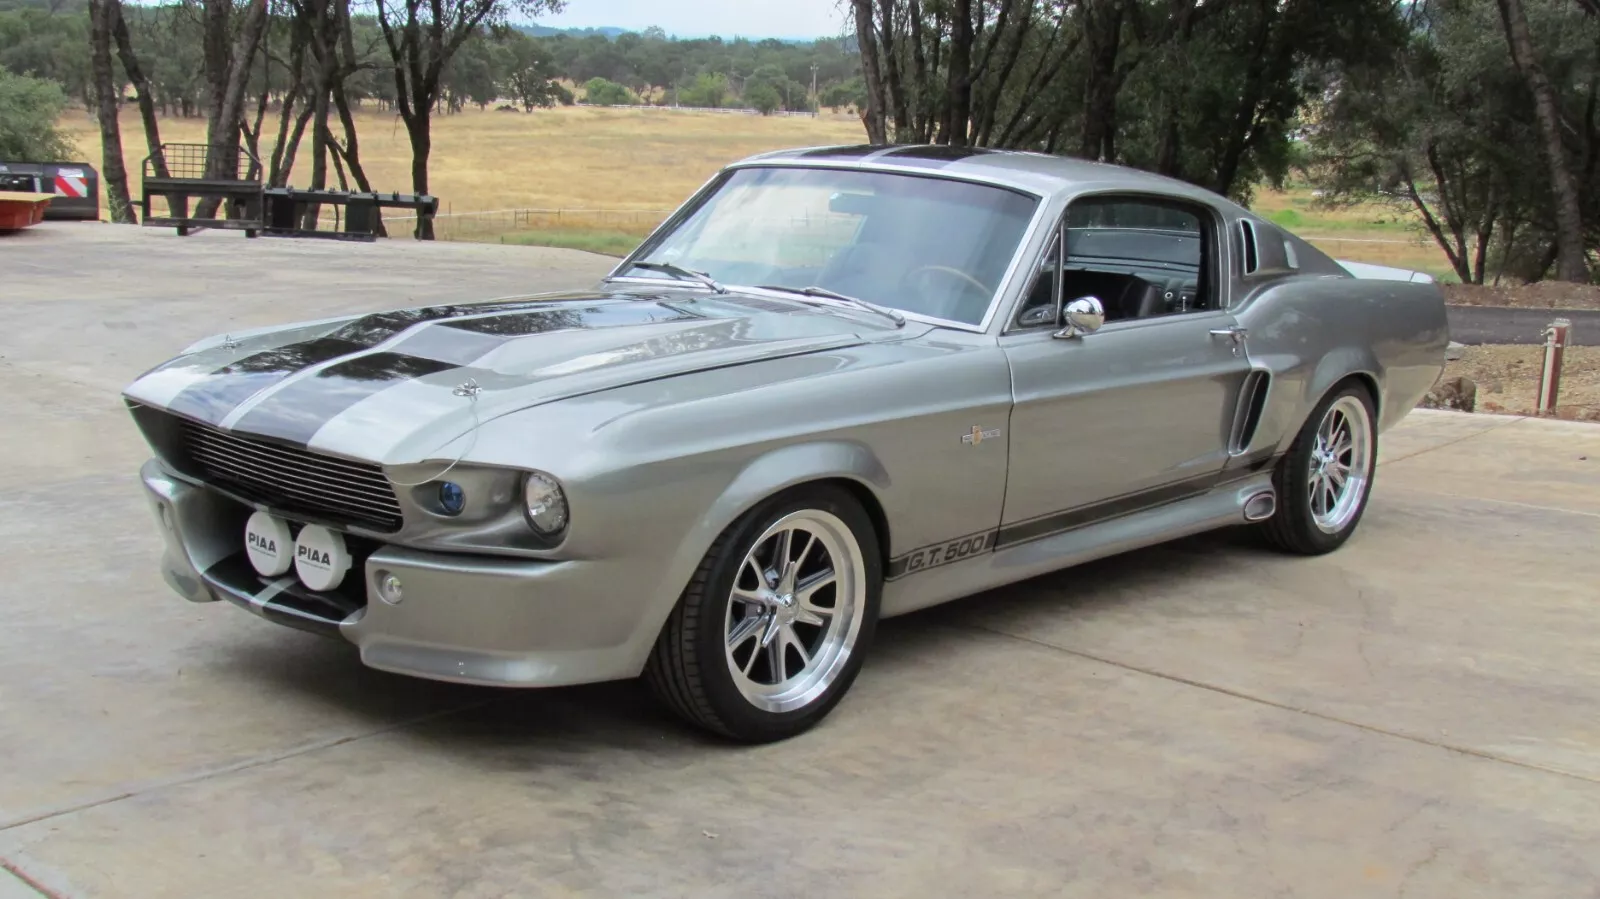 1968 Shelby GT500 for sale